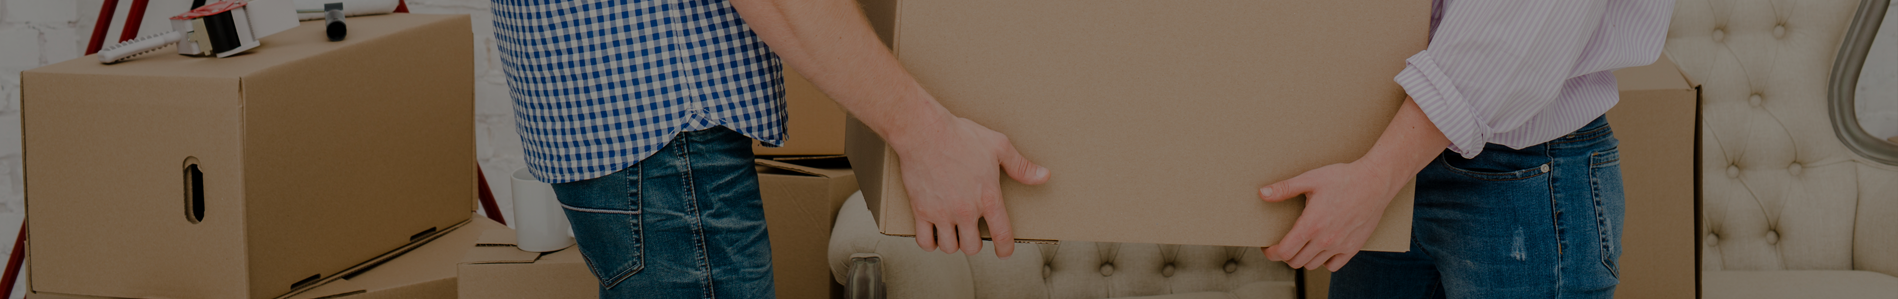 Checklist for moving out of home: Do yours and avoid unforeseen events.